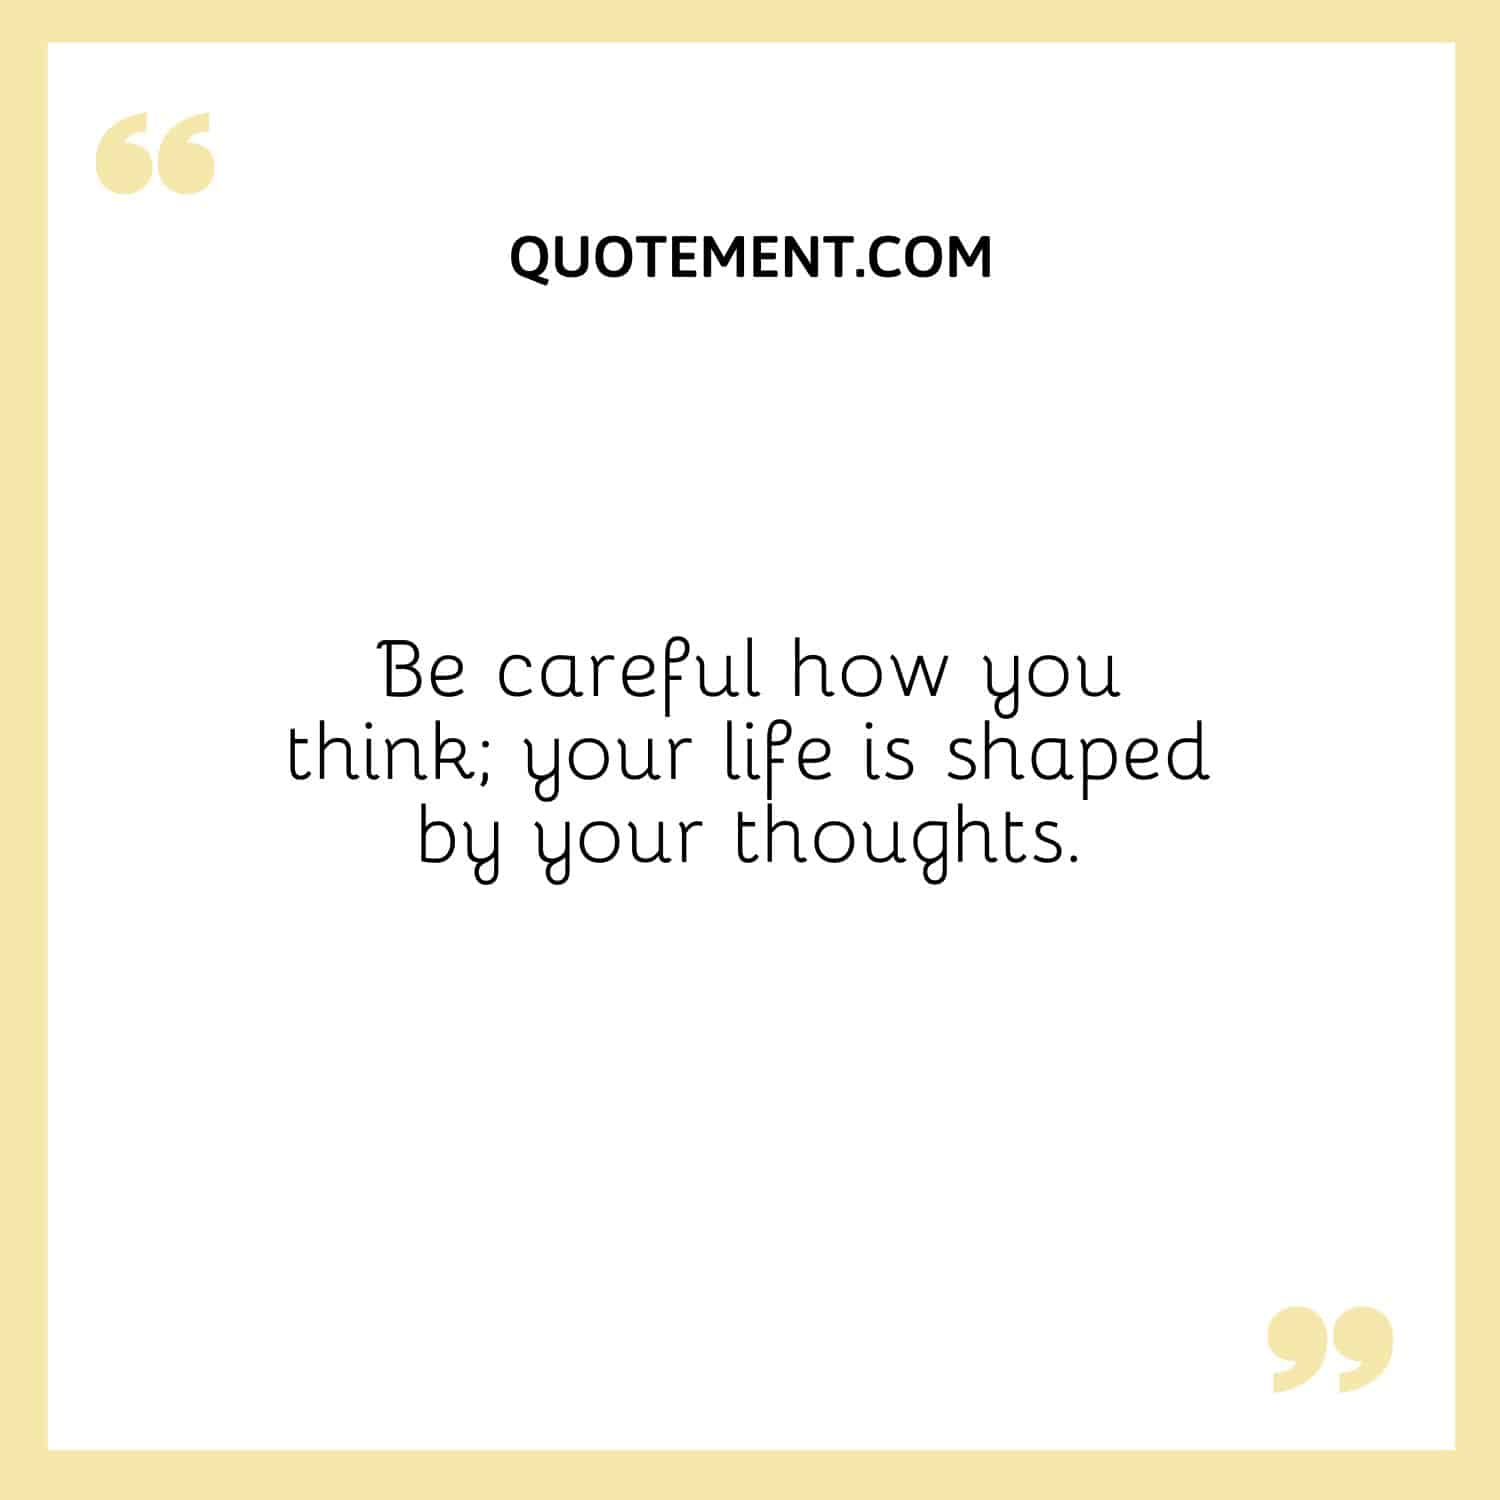 Be careful how you think; your life is shaped by your thoughts.